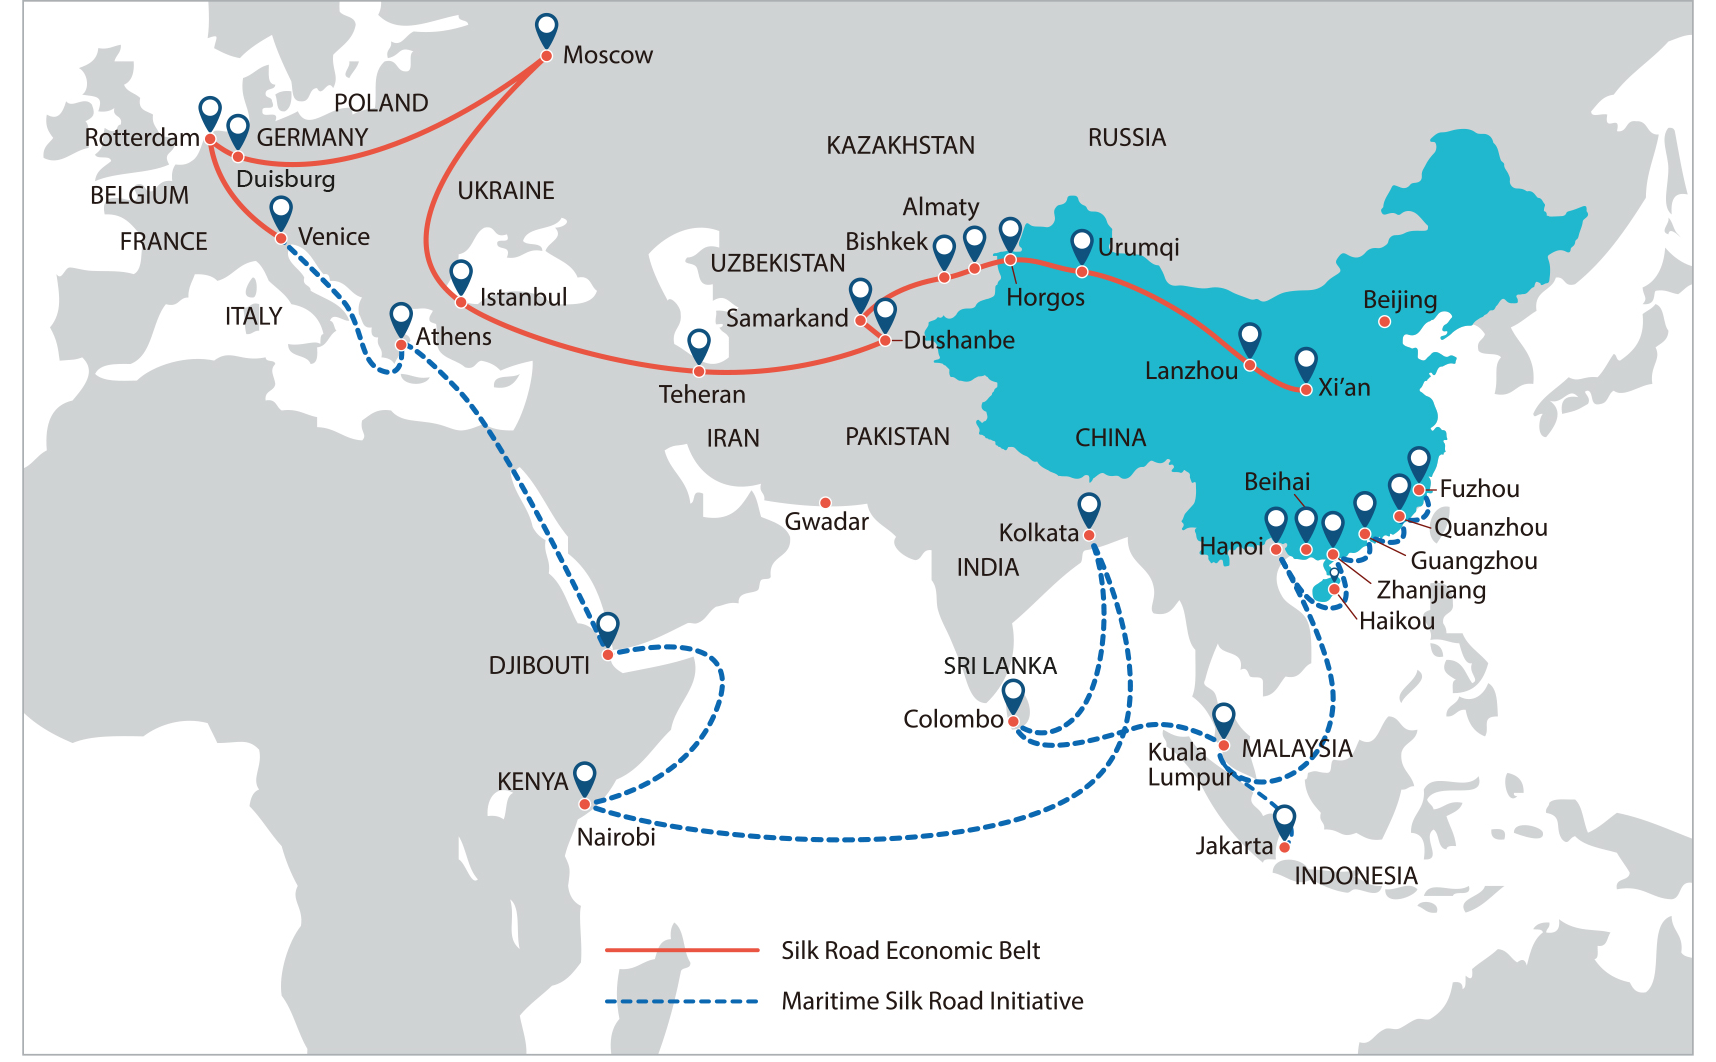 China&#39;s Belt and Road Initiative: Projects pave the way | Herbert Smith Freehills | Global law firm